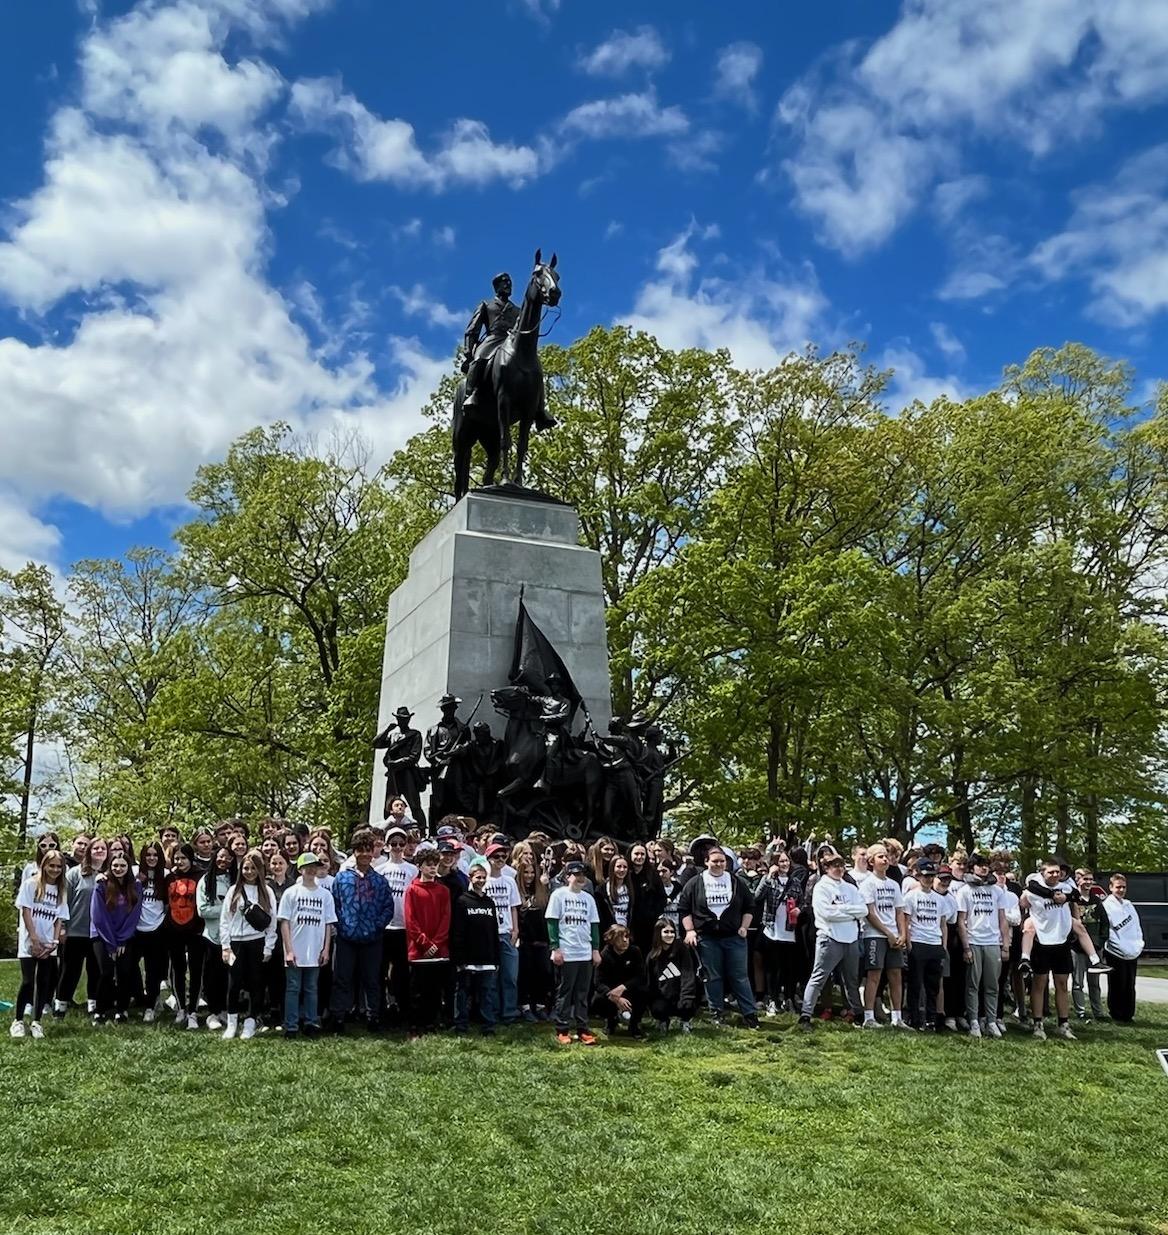 The Penn Middle School students gather at the Virginia Monument